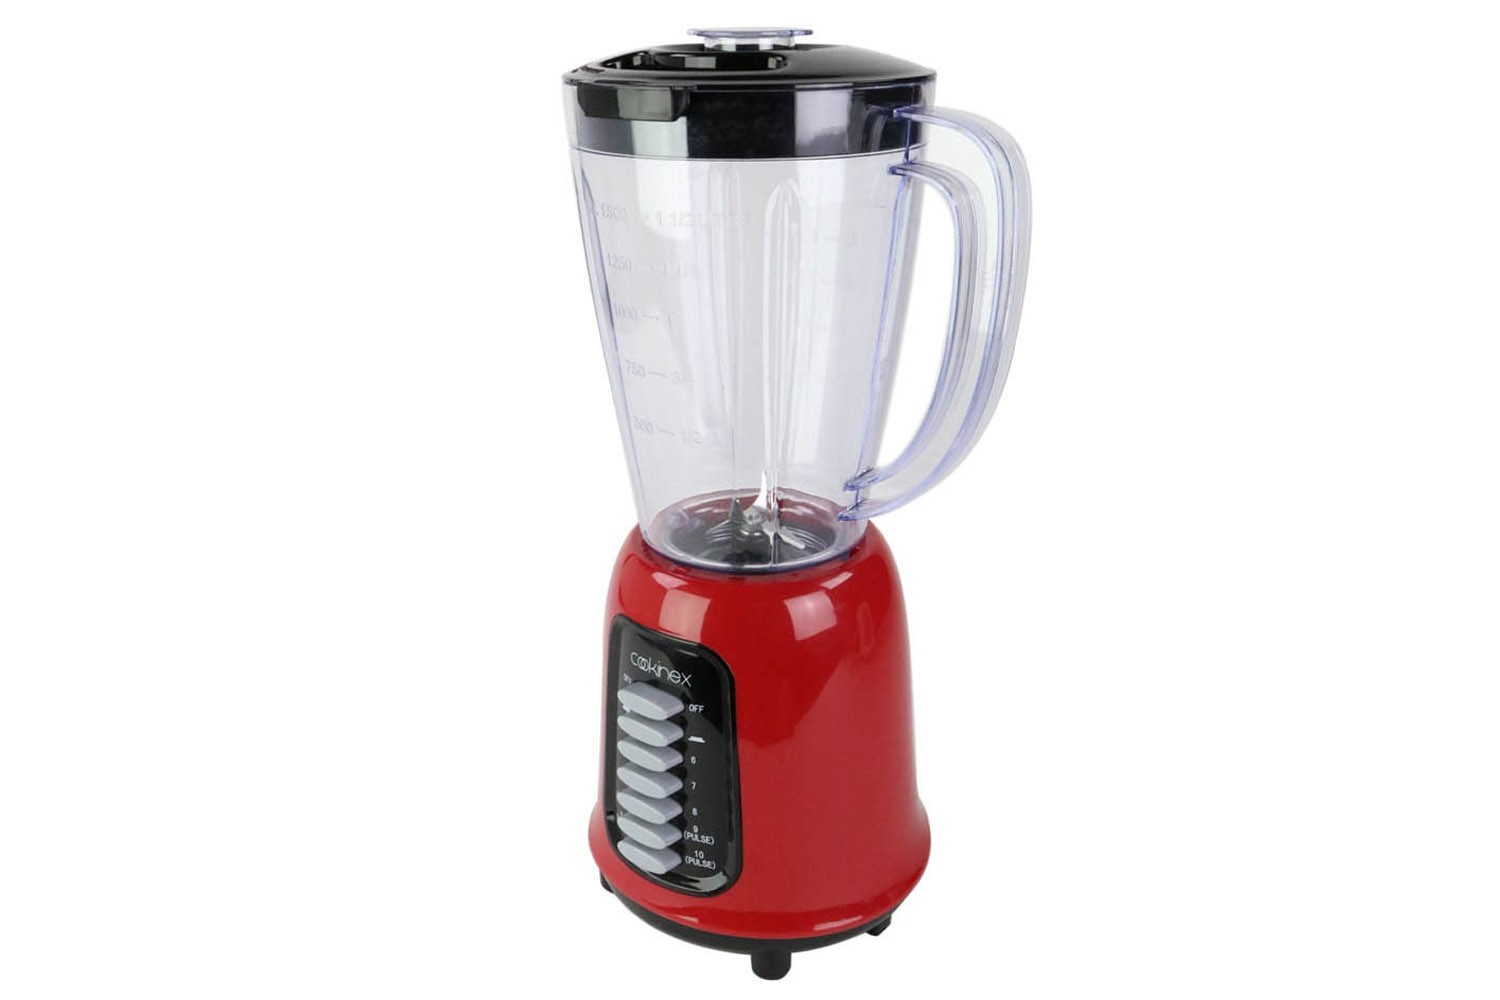 Buy Food Processors Online from Cookinex